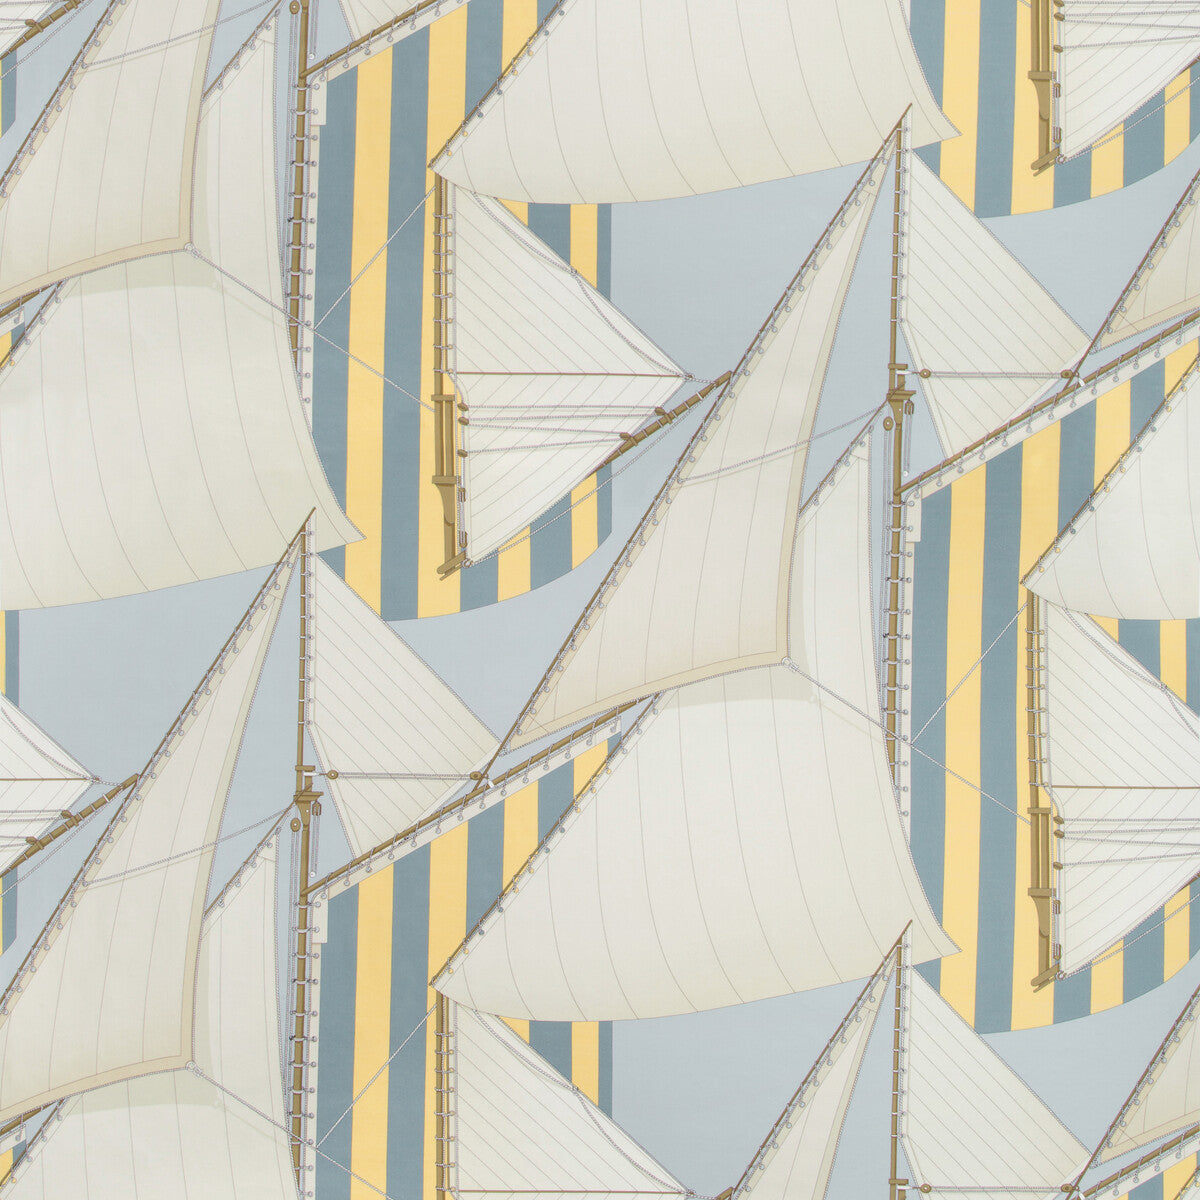 St Tropez Print fabric in blue/yellow color - pattern 2018136.405.0 - by Lee Jofa in the Suzanne Kasler The Riviera collection